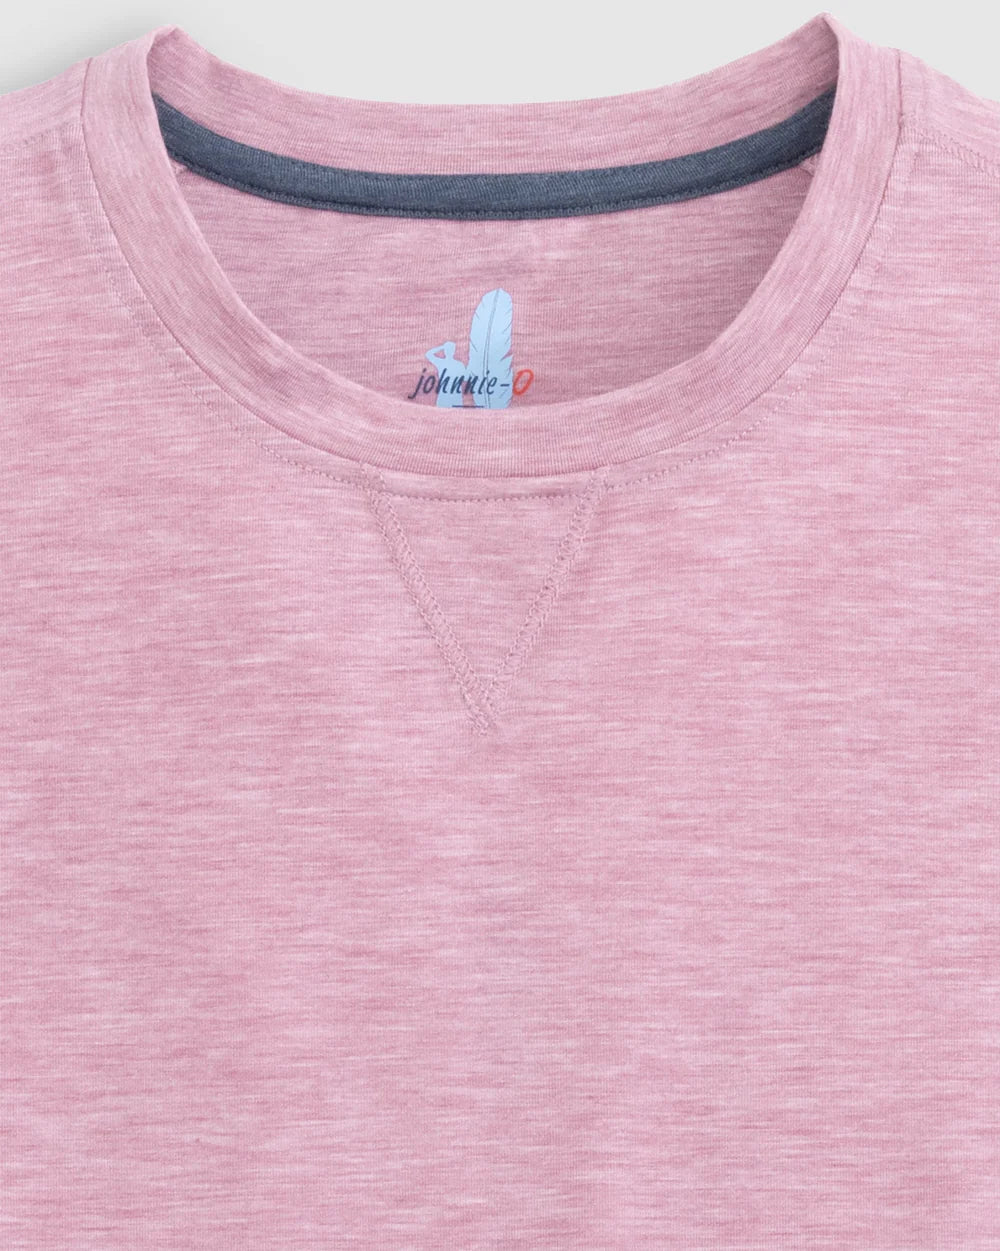 The Course Performance Tee